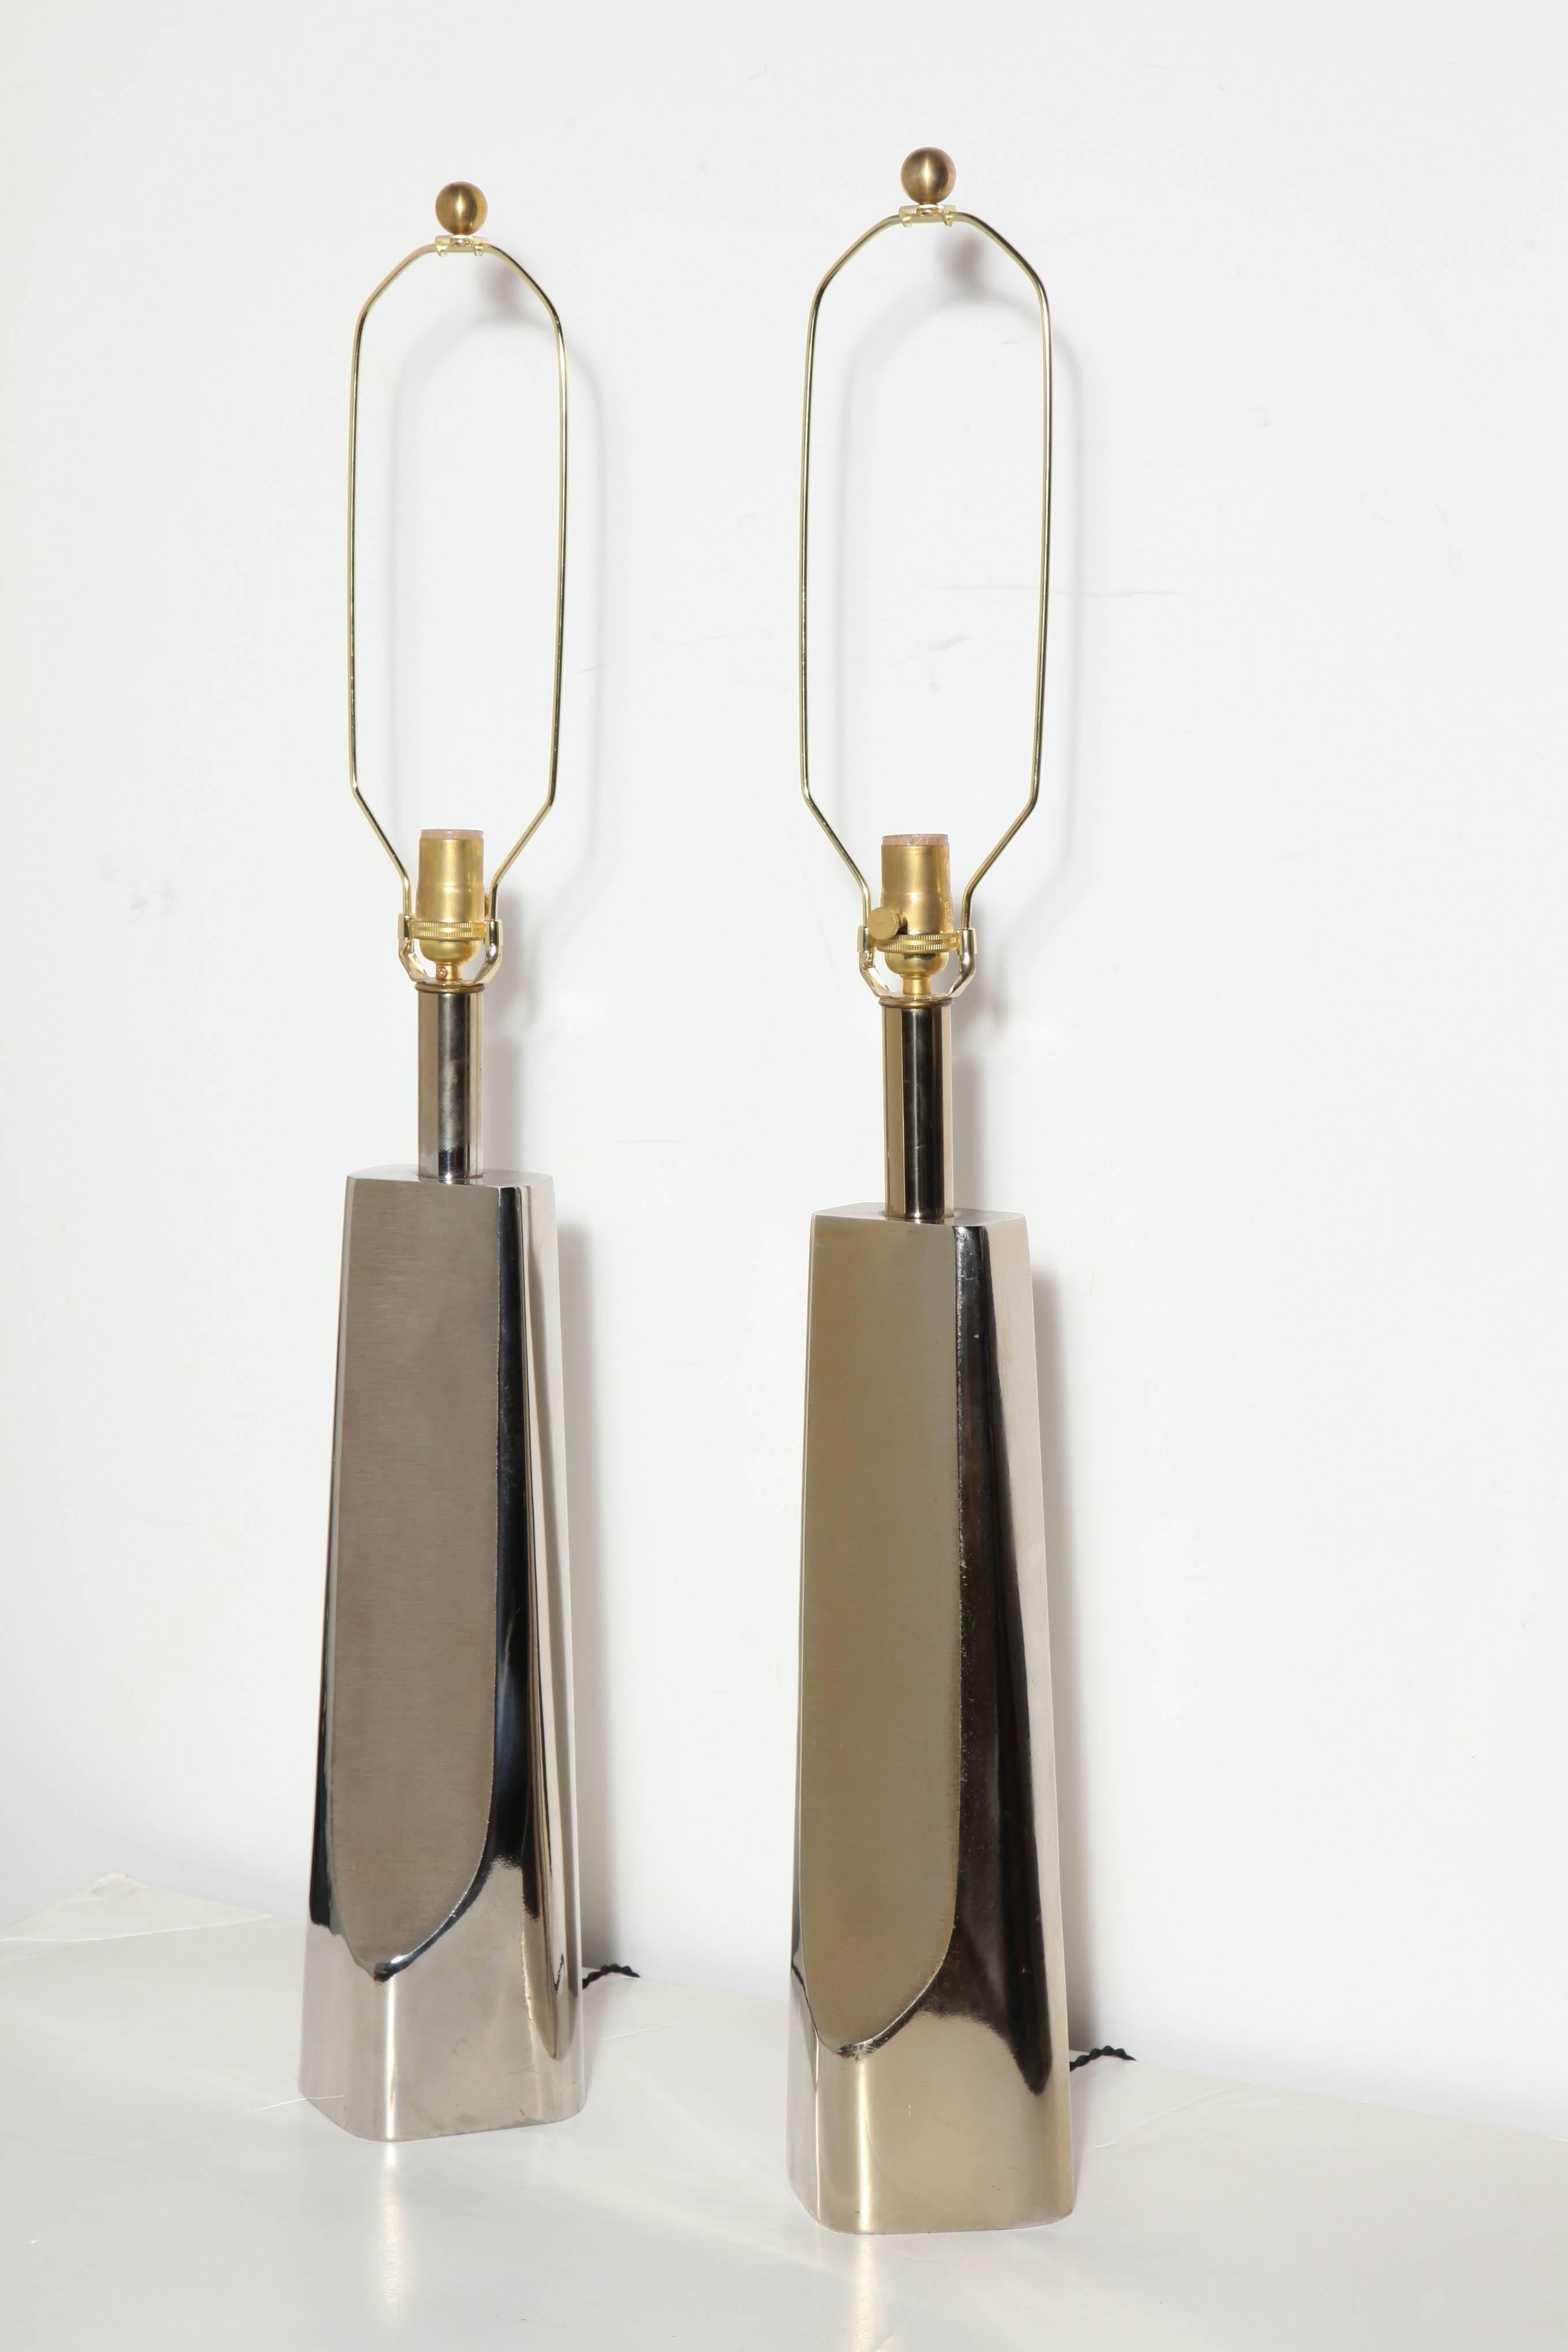 early 1960's Architectural, Maurizio Tempestini for Laurel Lamp Company Brutalist Table Lamps.  Featuring a sculptural, rectangular, reflective form in plated Metal with a polished Brass Nickel sheen, angled Satin finished fronts and tubular Brass